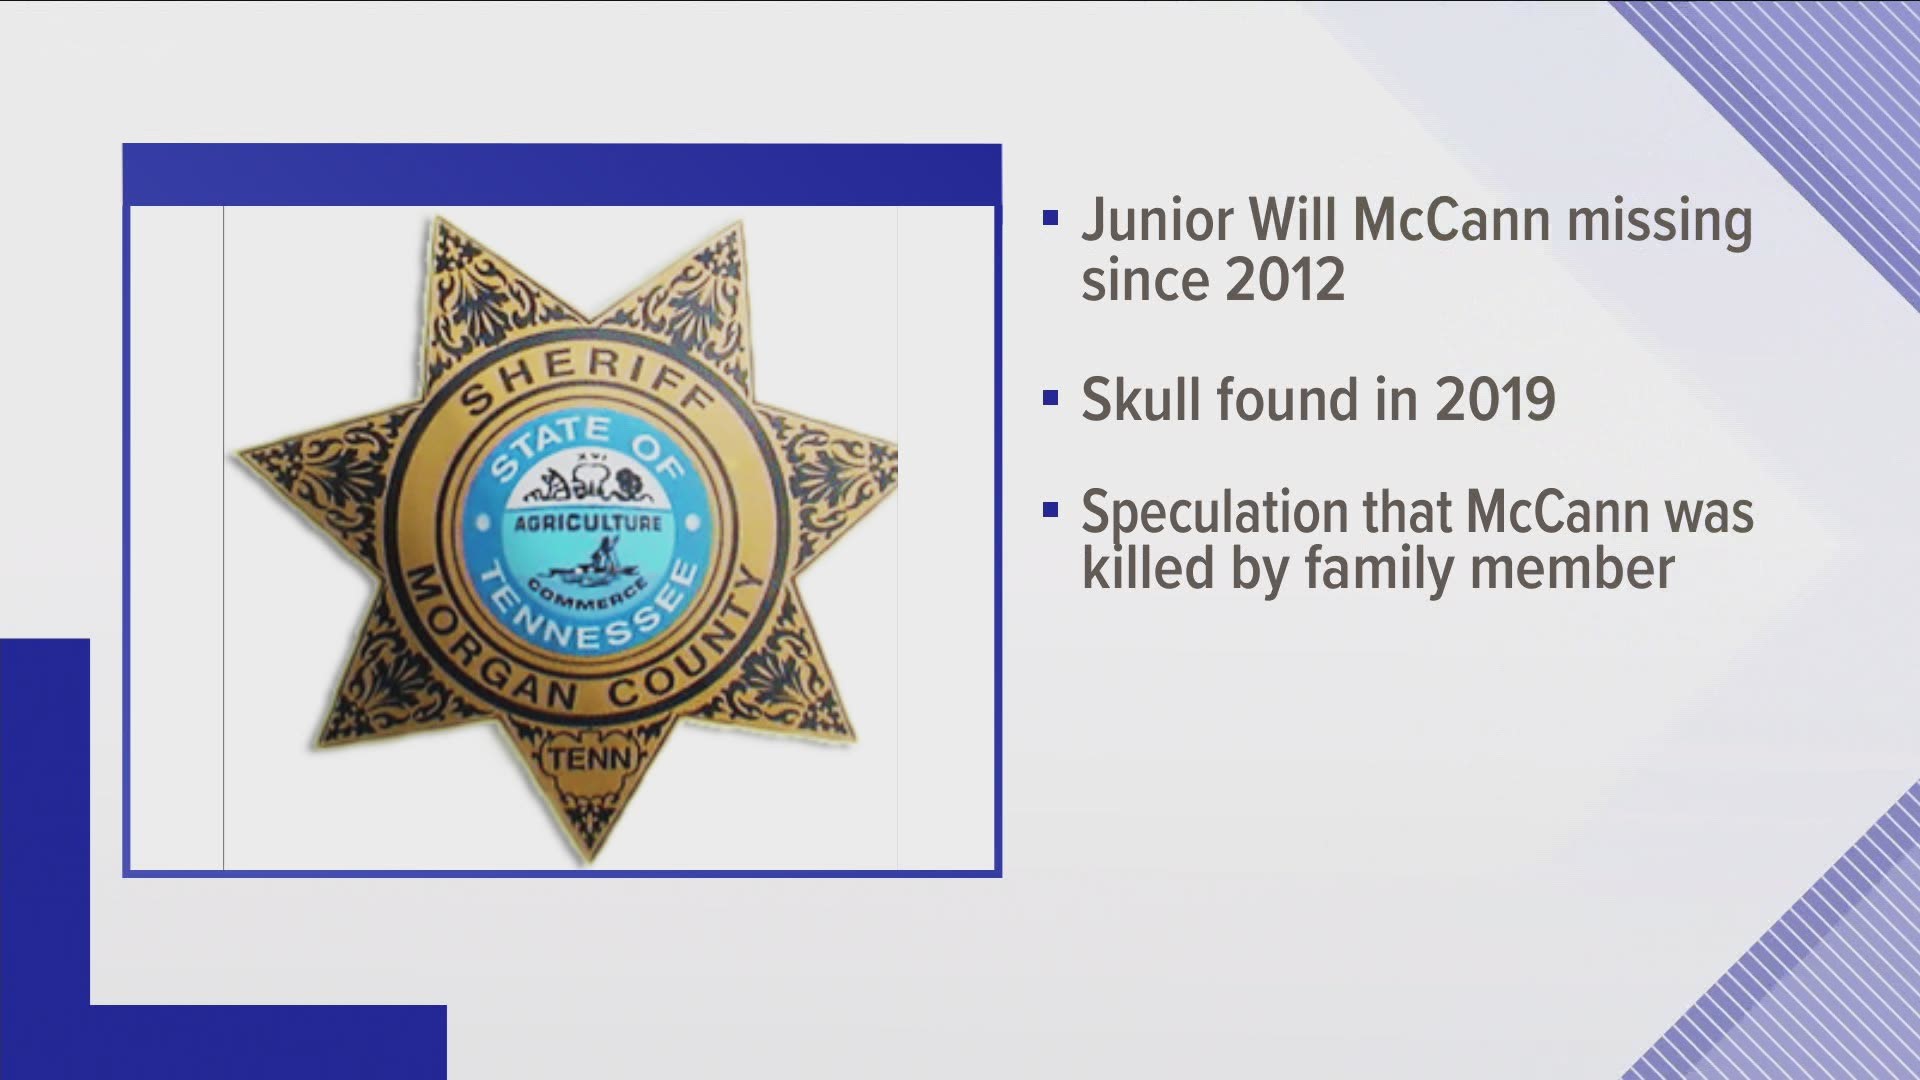 Officials have identified a skull on someone's fireplace mantle as a missing Morgan county man.